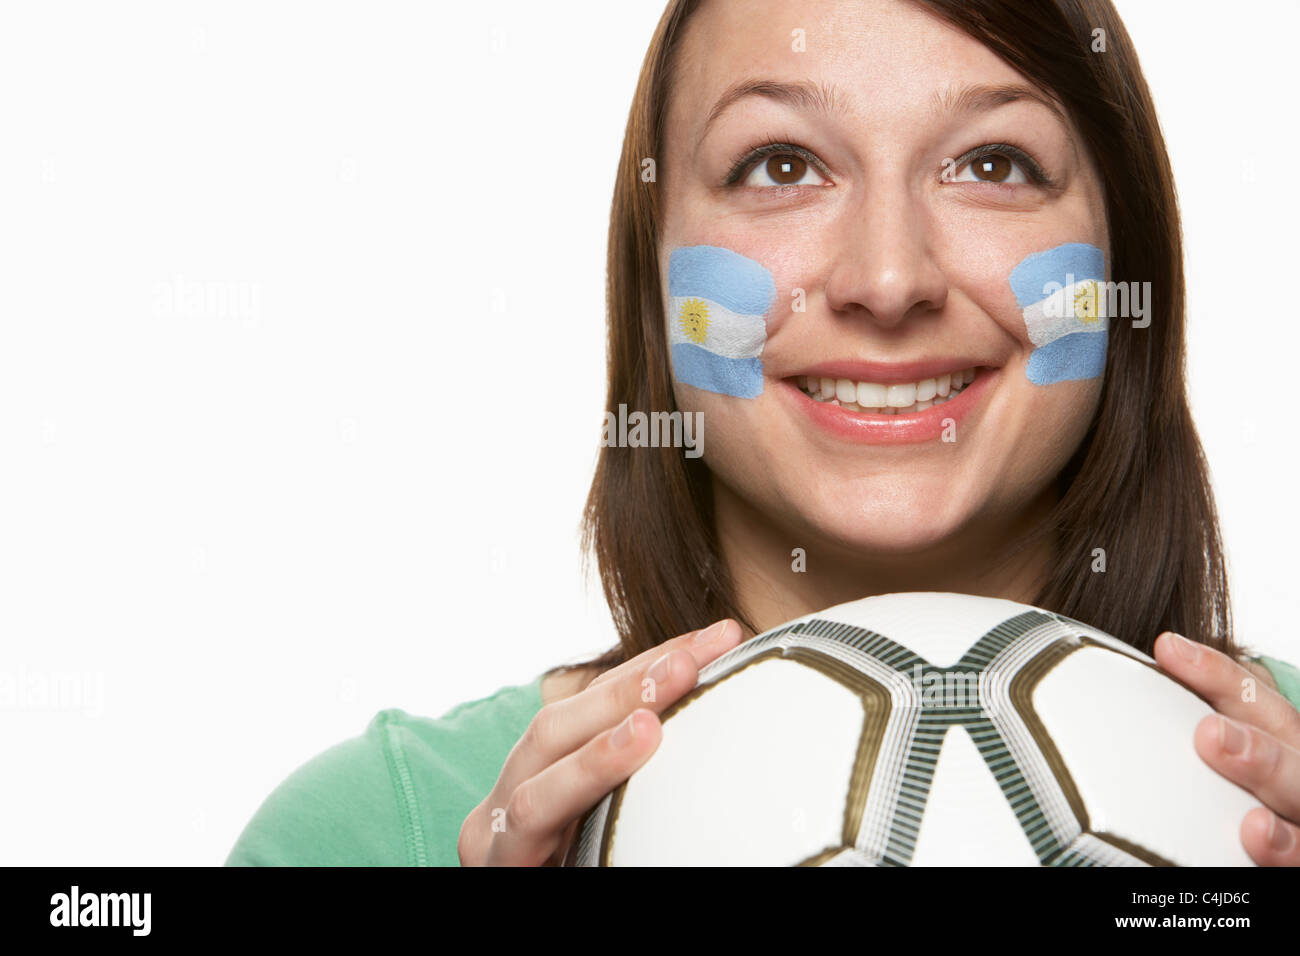 Young Female Football Fan With Argentinian Flag Painted On Face Stock Photo